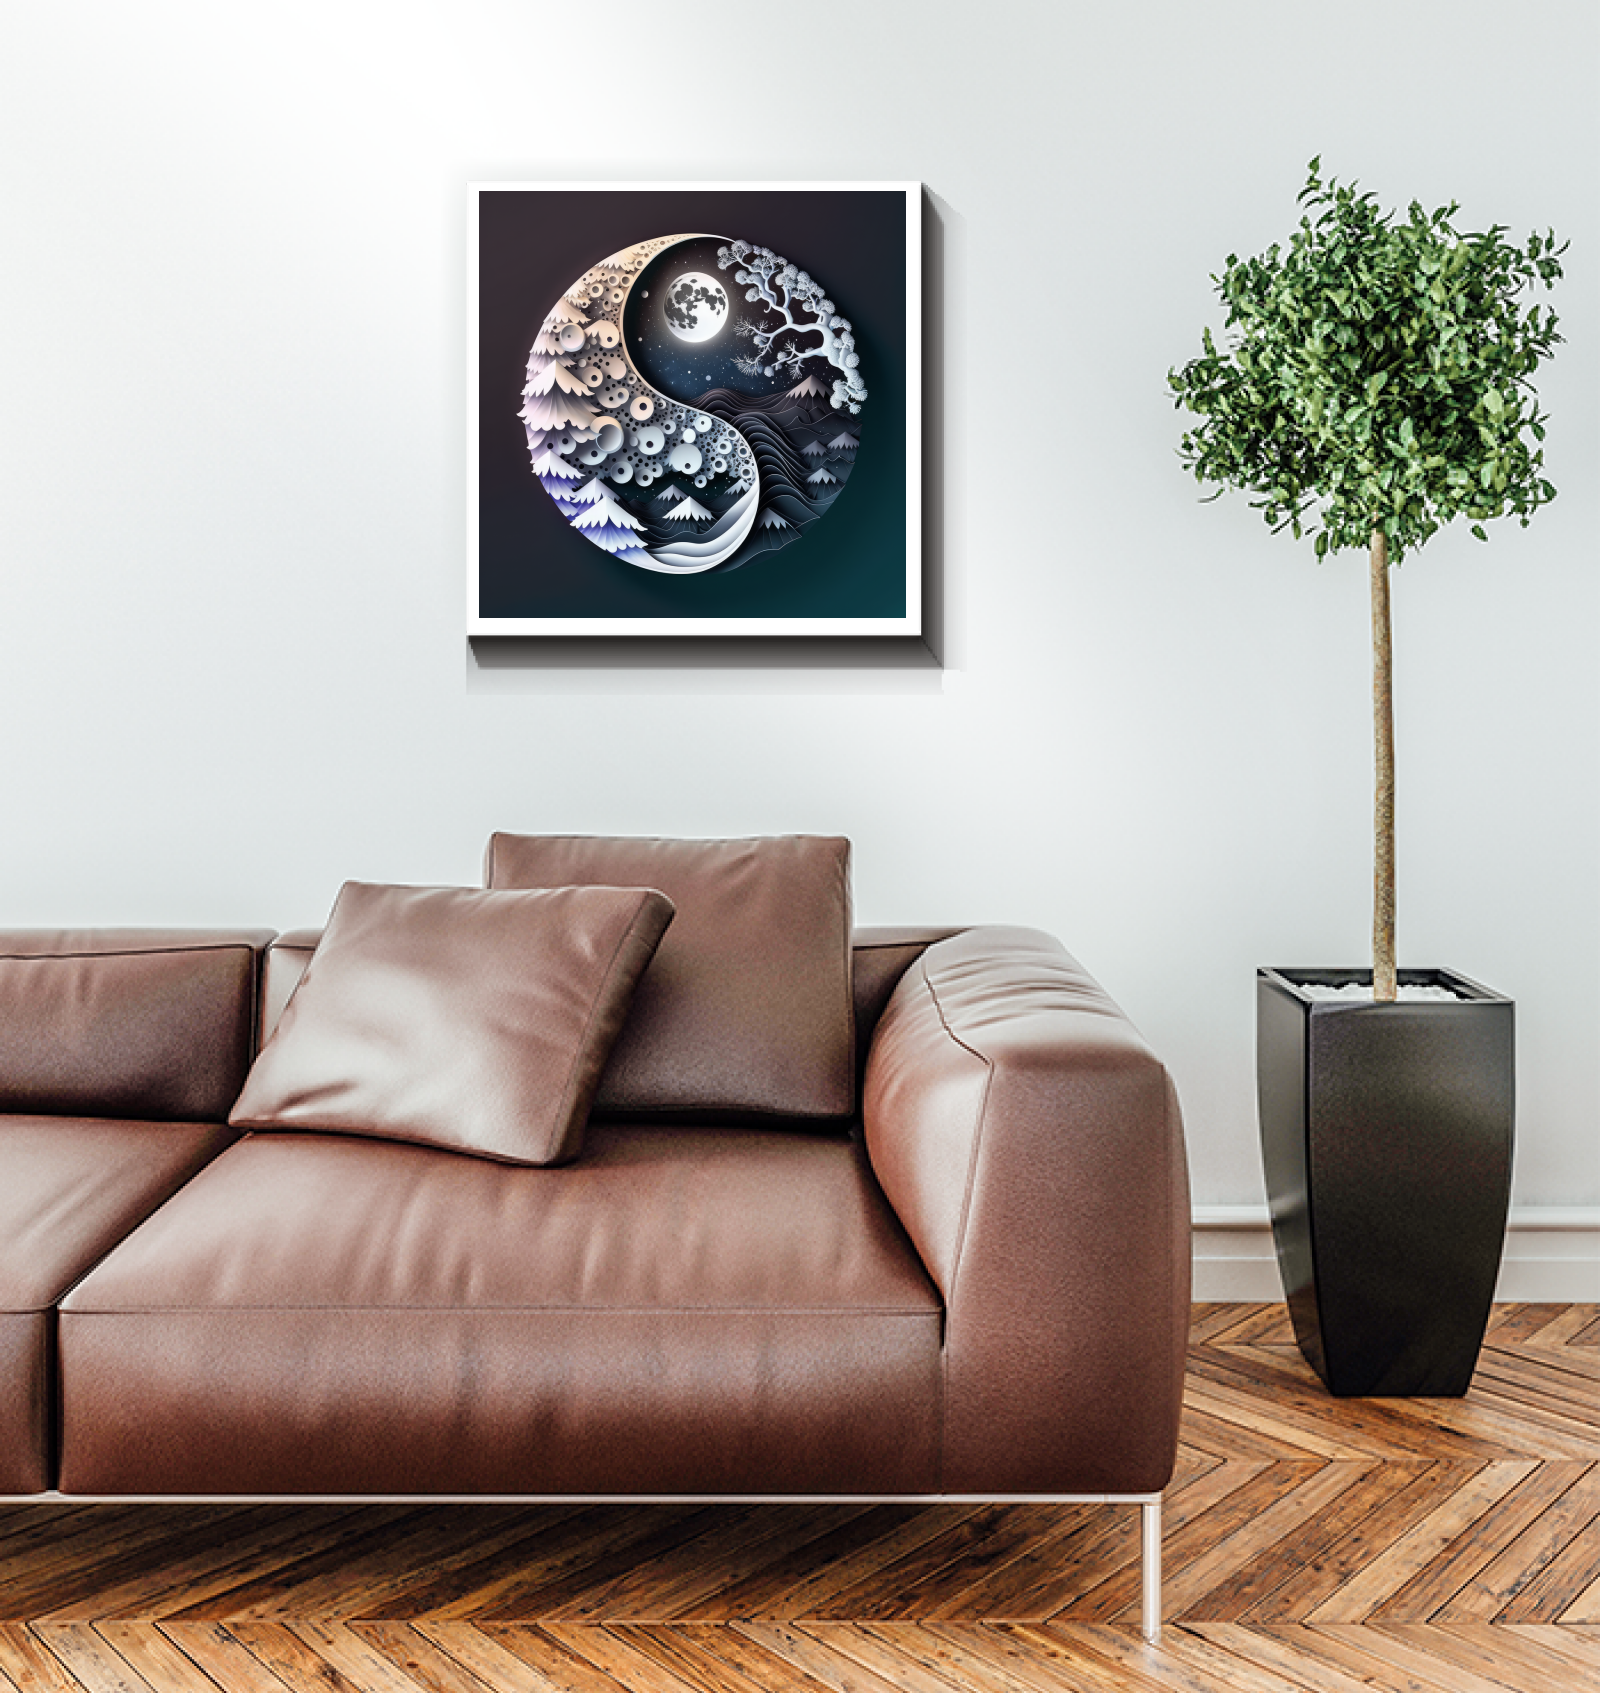 Canvas art featuring wild beasts and tame creatures side by side.